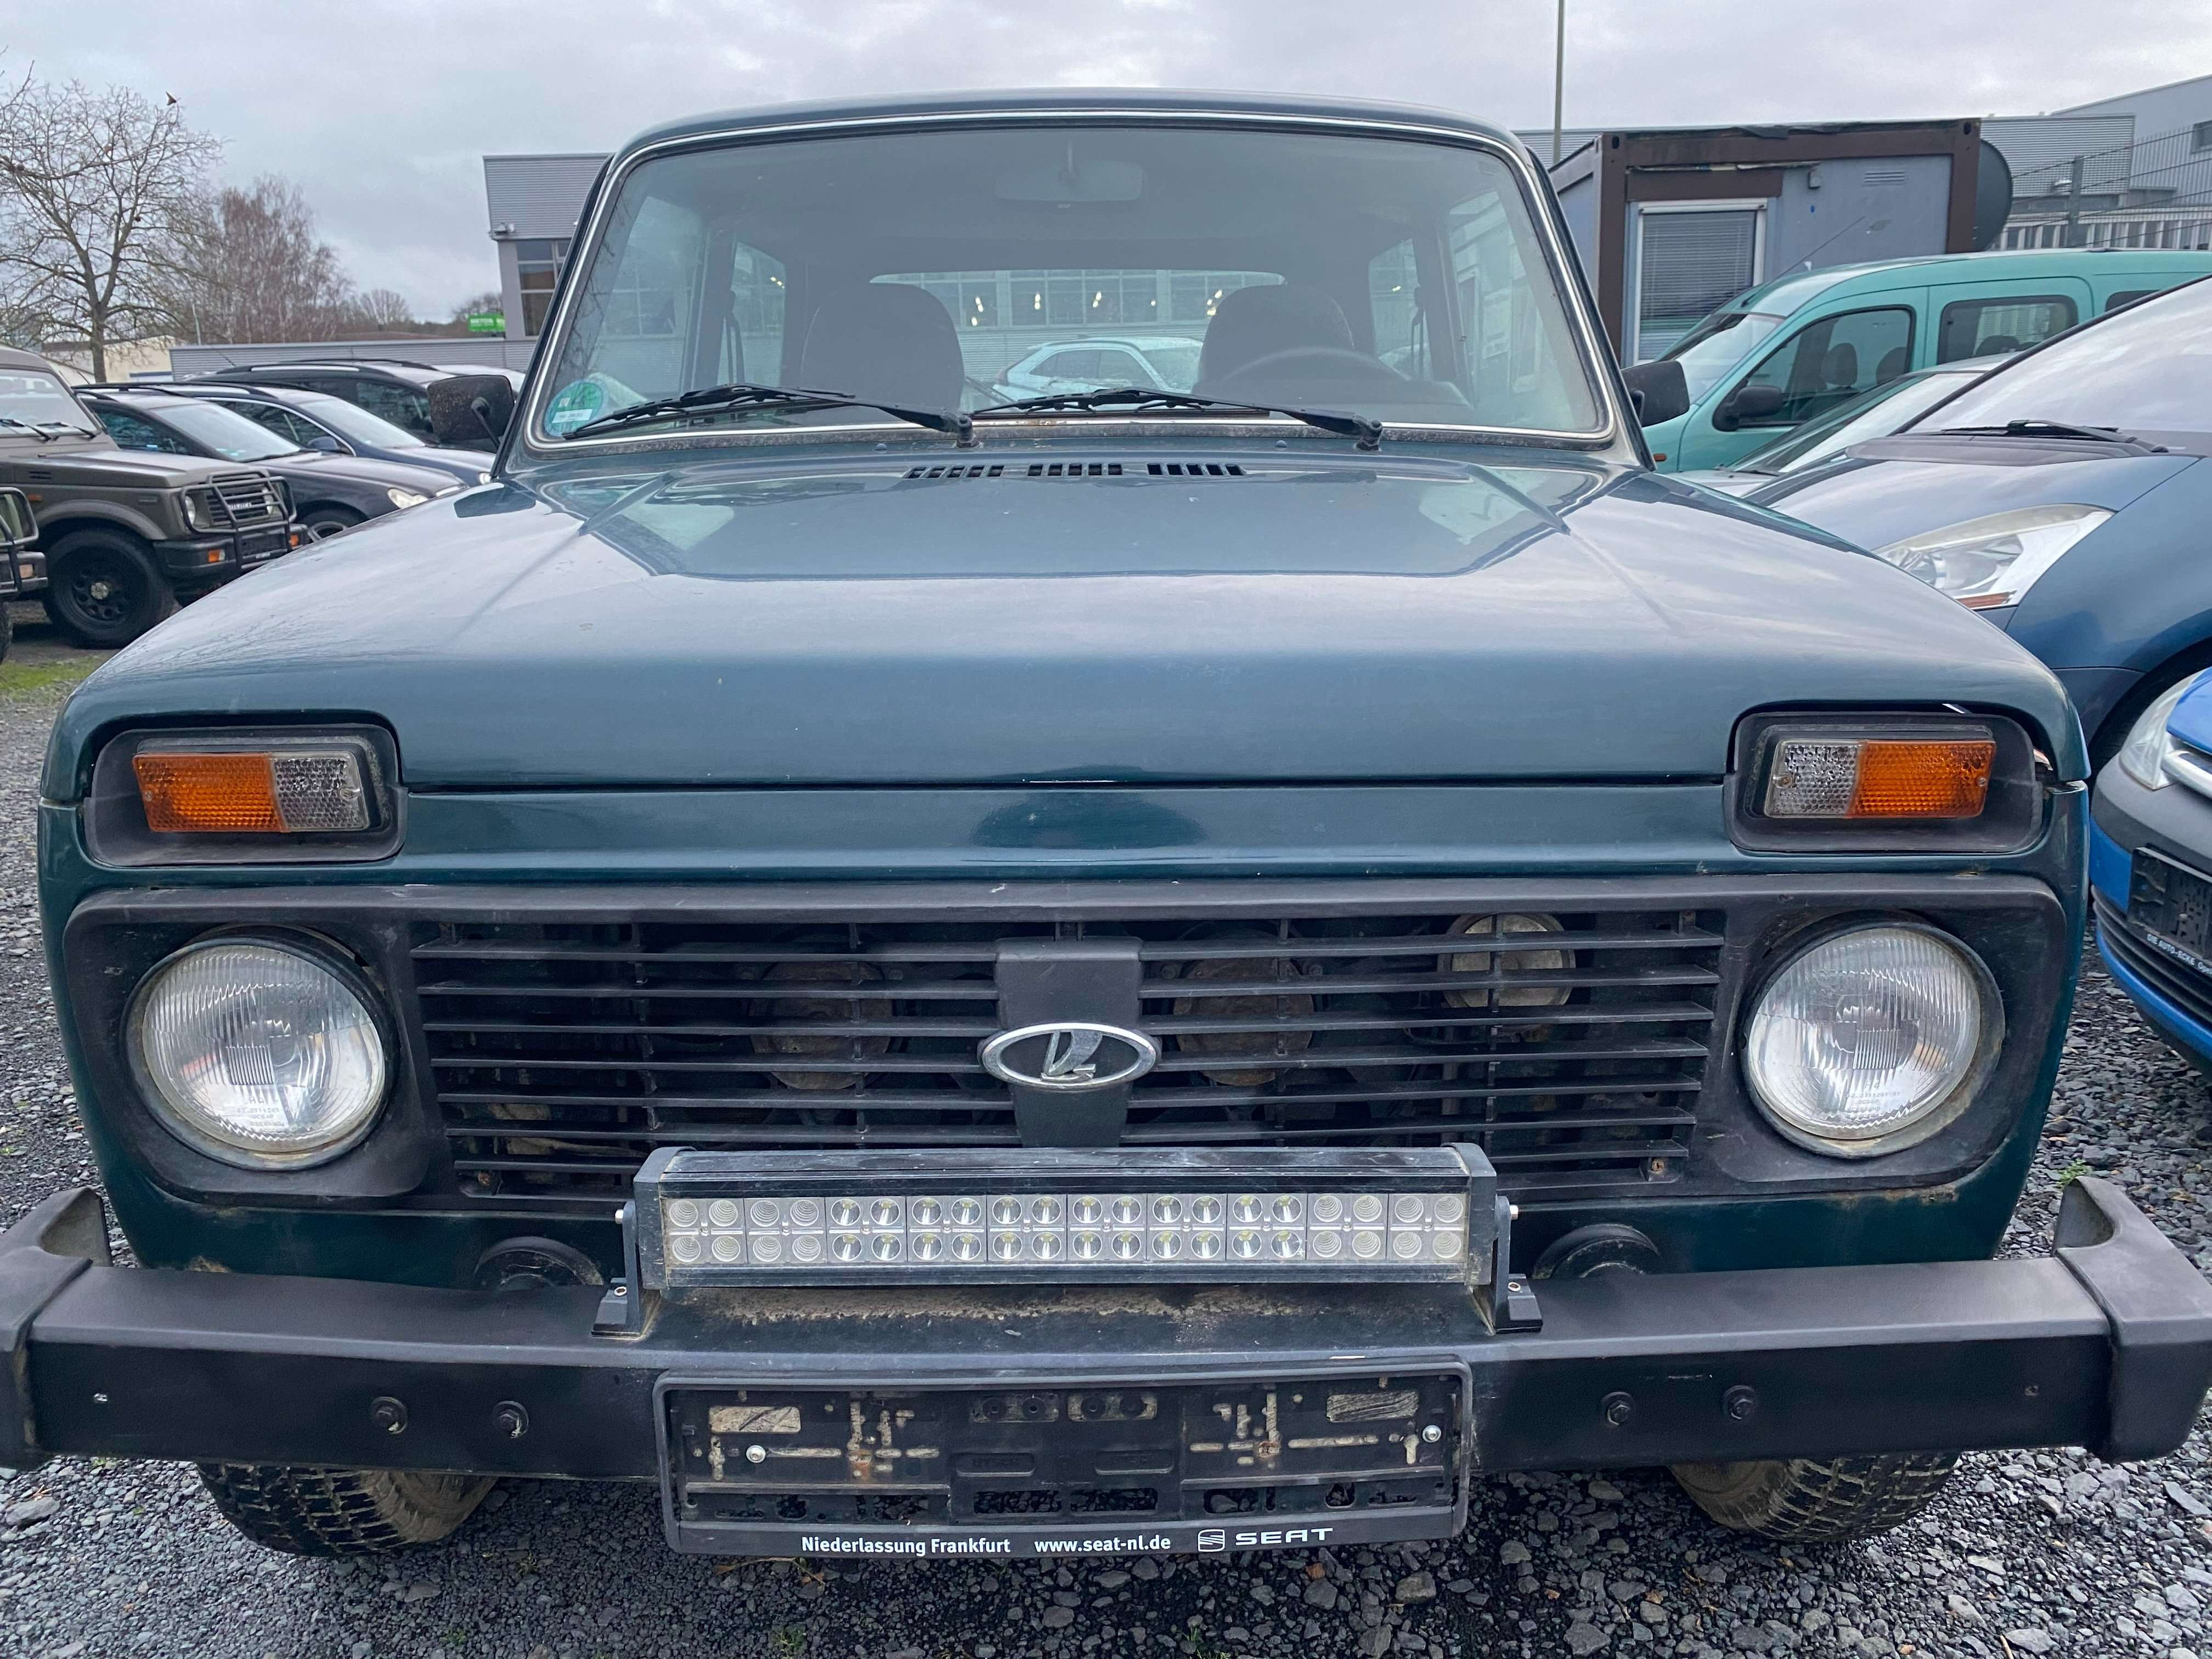 Lada Niva Off-Road/Pick-up in Green used in Gelnhausen for € 1,499.-